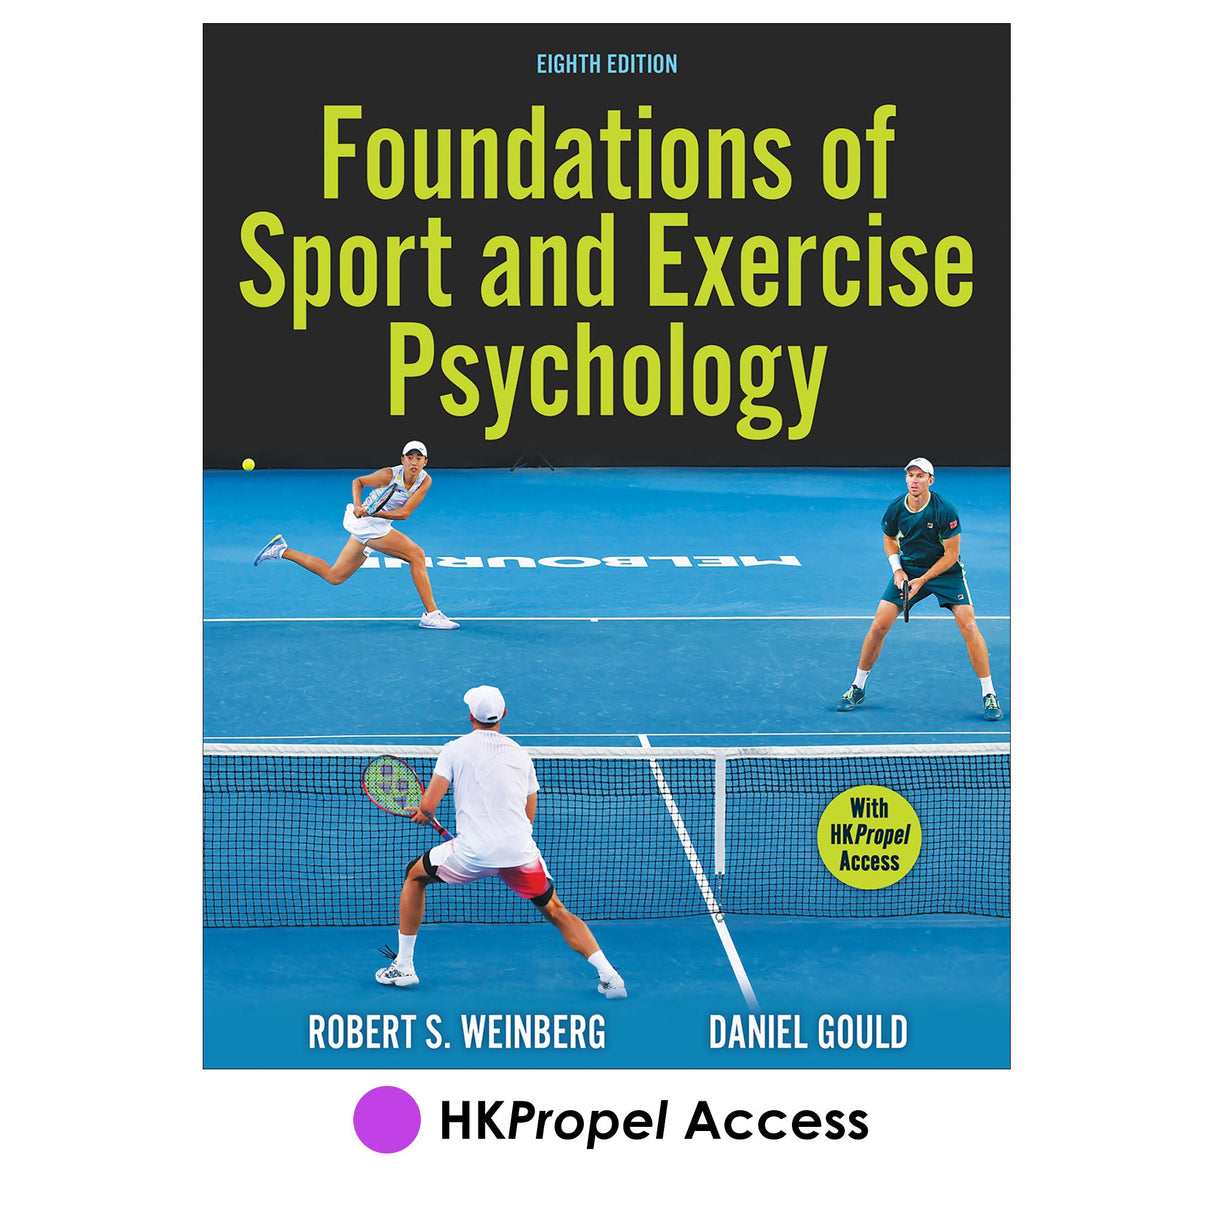 Foundations of Sport and Exercise Psychology 8th Edition HKPropel Access